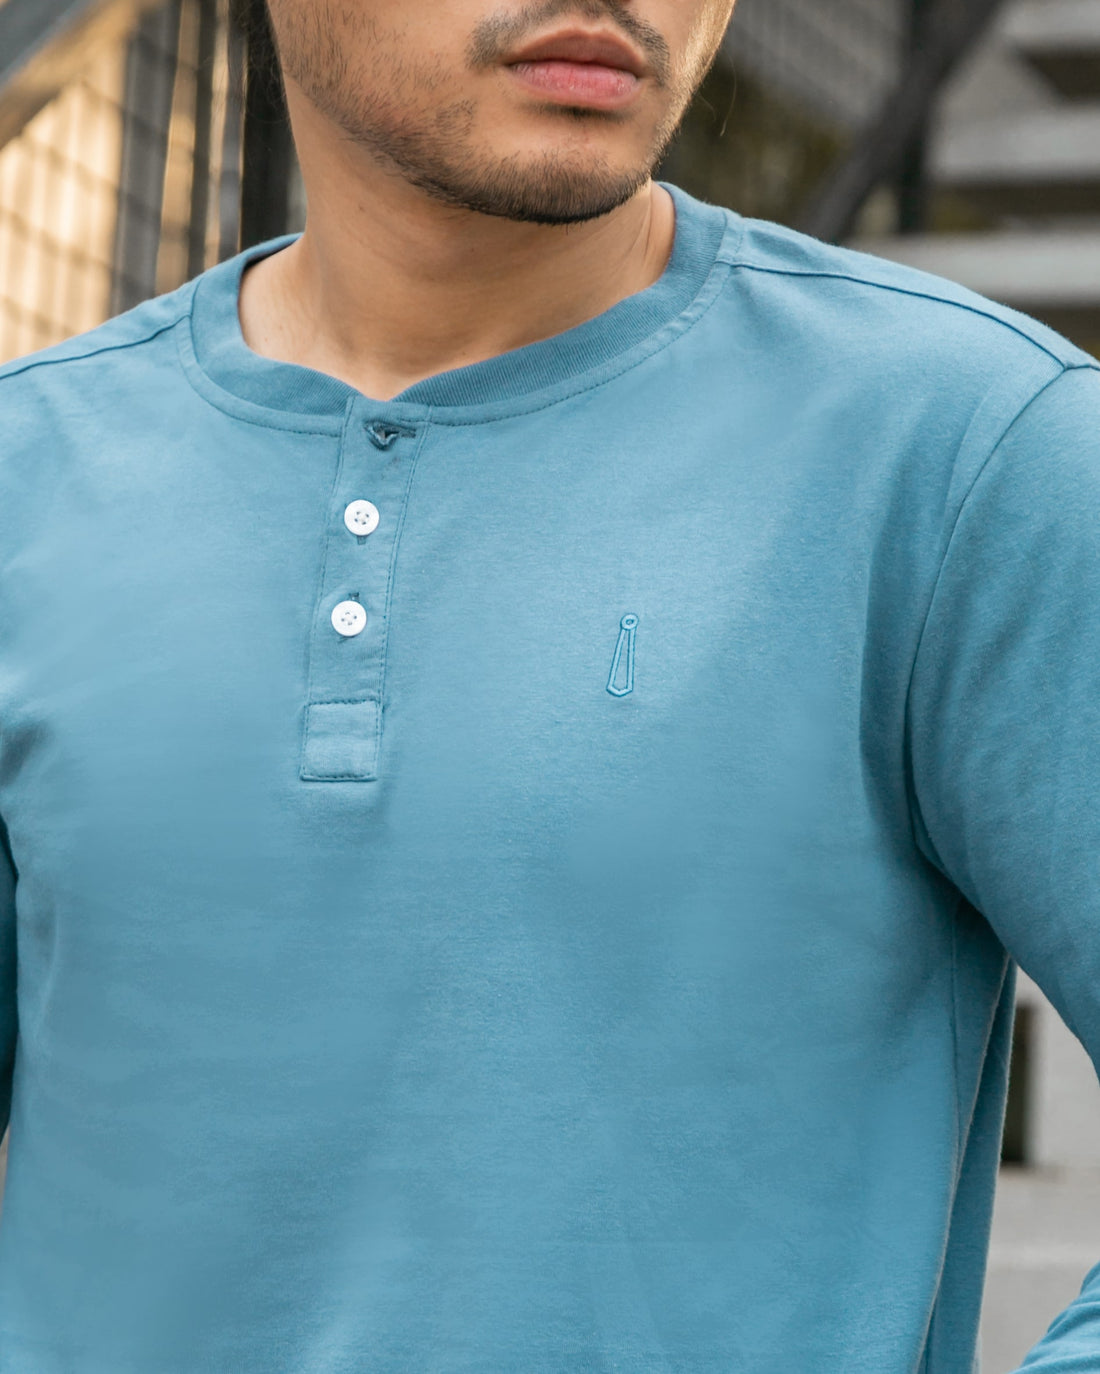 Look Smart and Stay Comfy with Henley Shirt